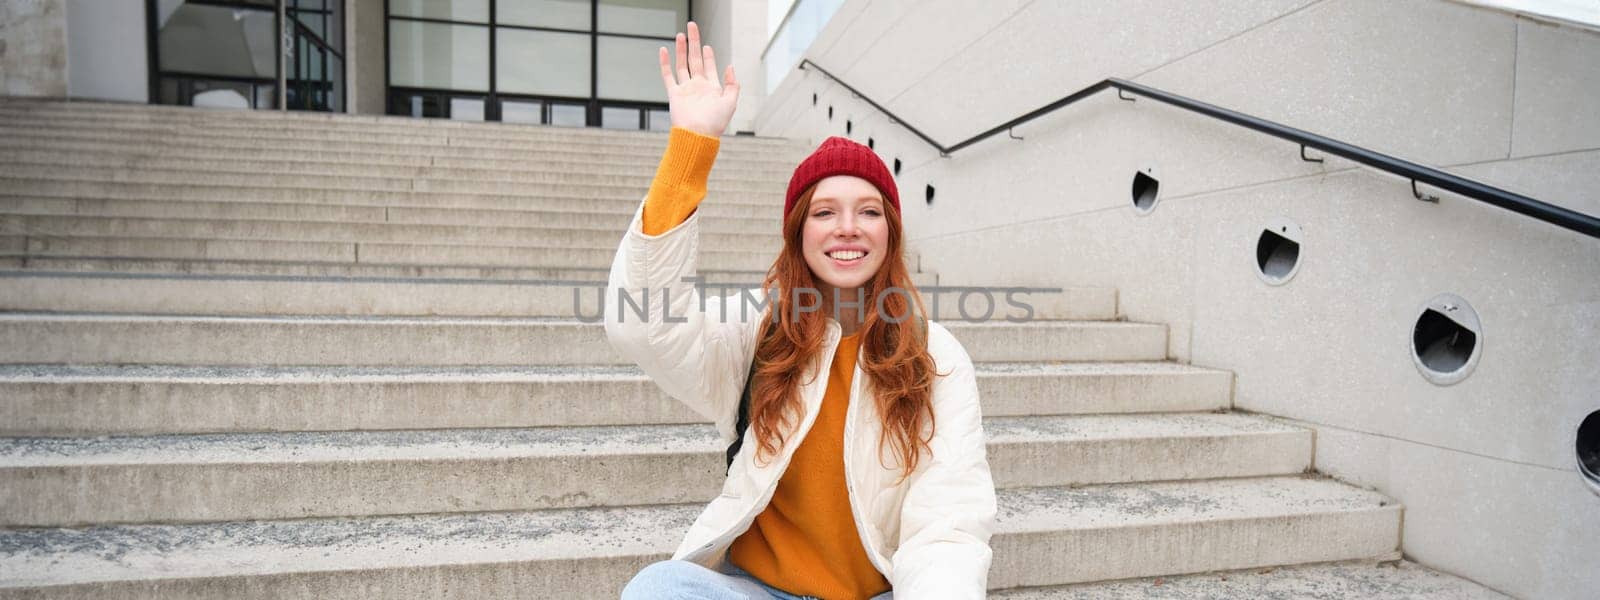 Smiling young redhead girl waits someone on stairs outdoors, waves hand at friend, holds smartphone, says hello. People and lifestyle concept